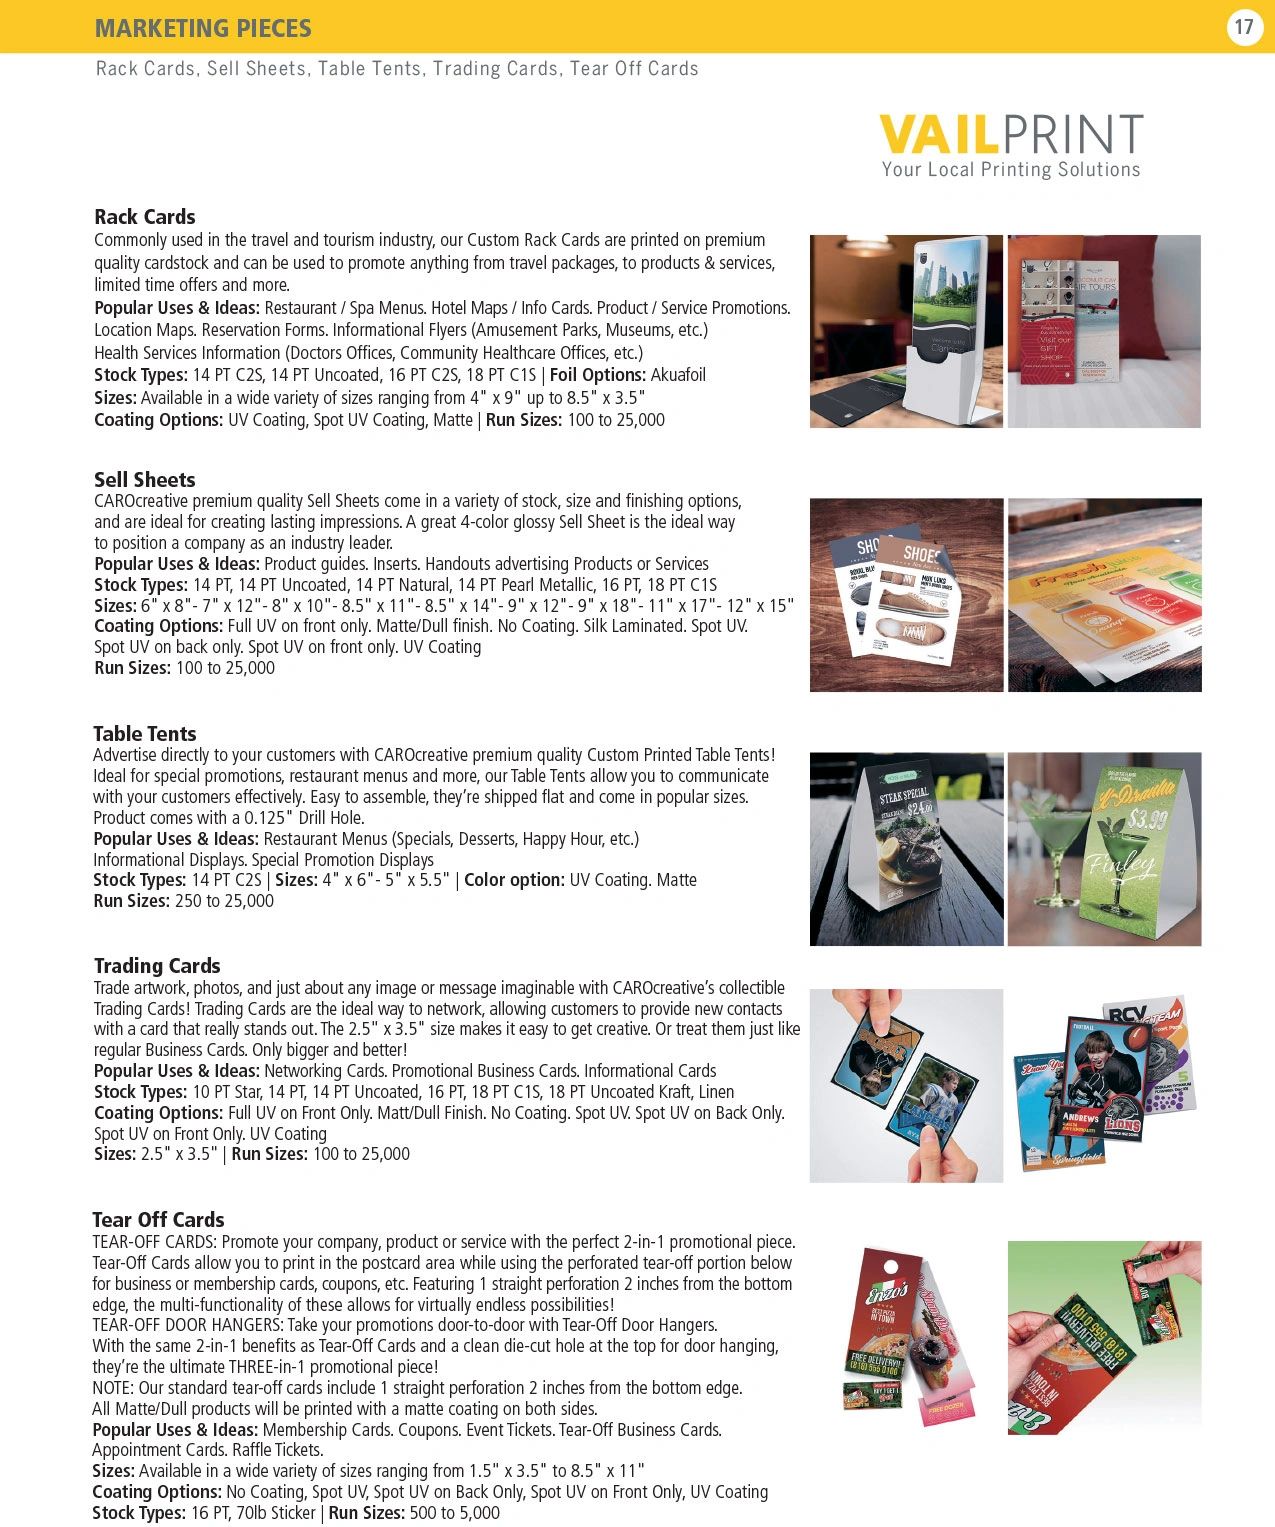 rack cards, sell sheets, table tents, trading cards, tear off cards, Graphic Design, Vail Print 